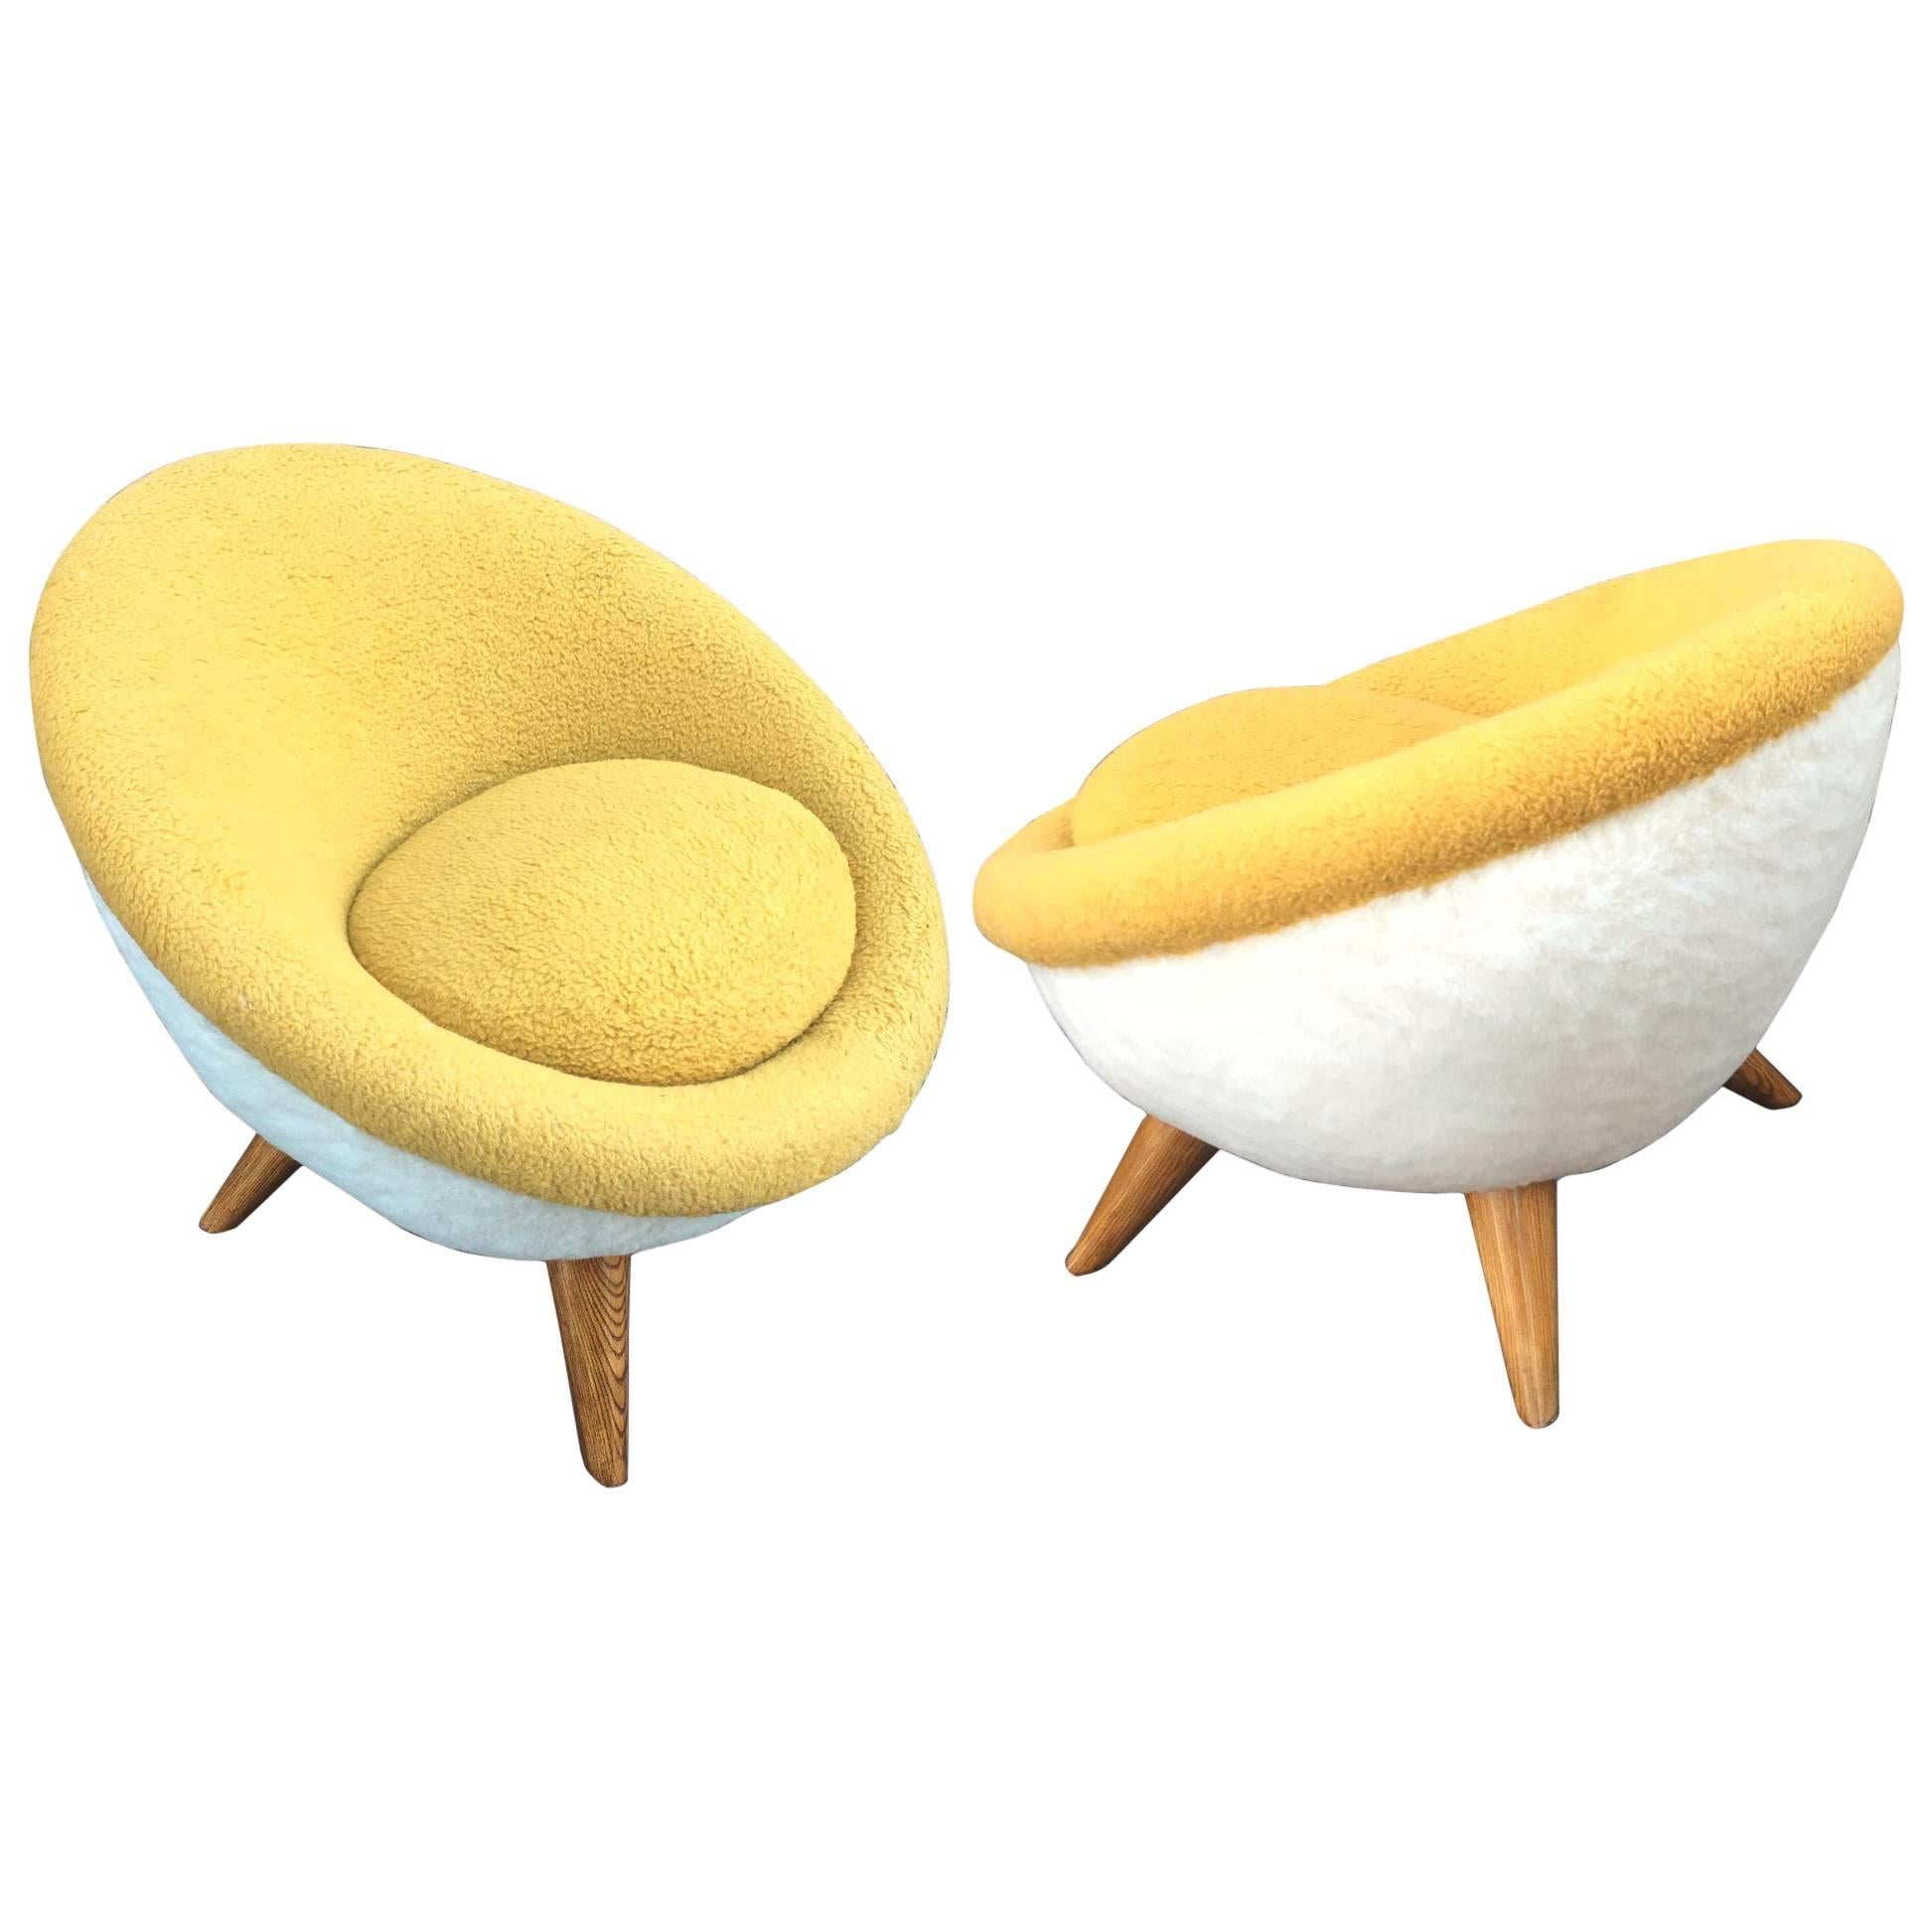 Jean Royère Pair of Chair, Model "Oeuf" in Yellow and Raw White Faux Fur For Sale